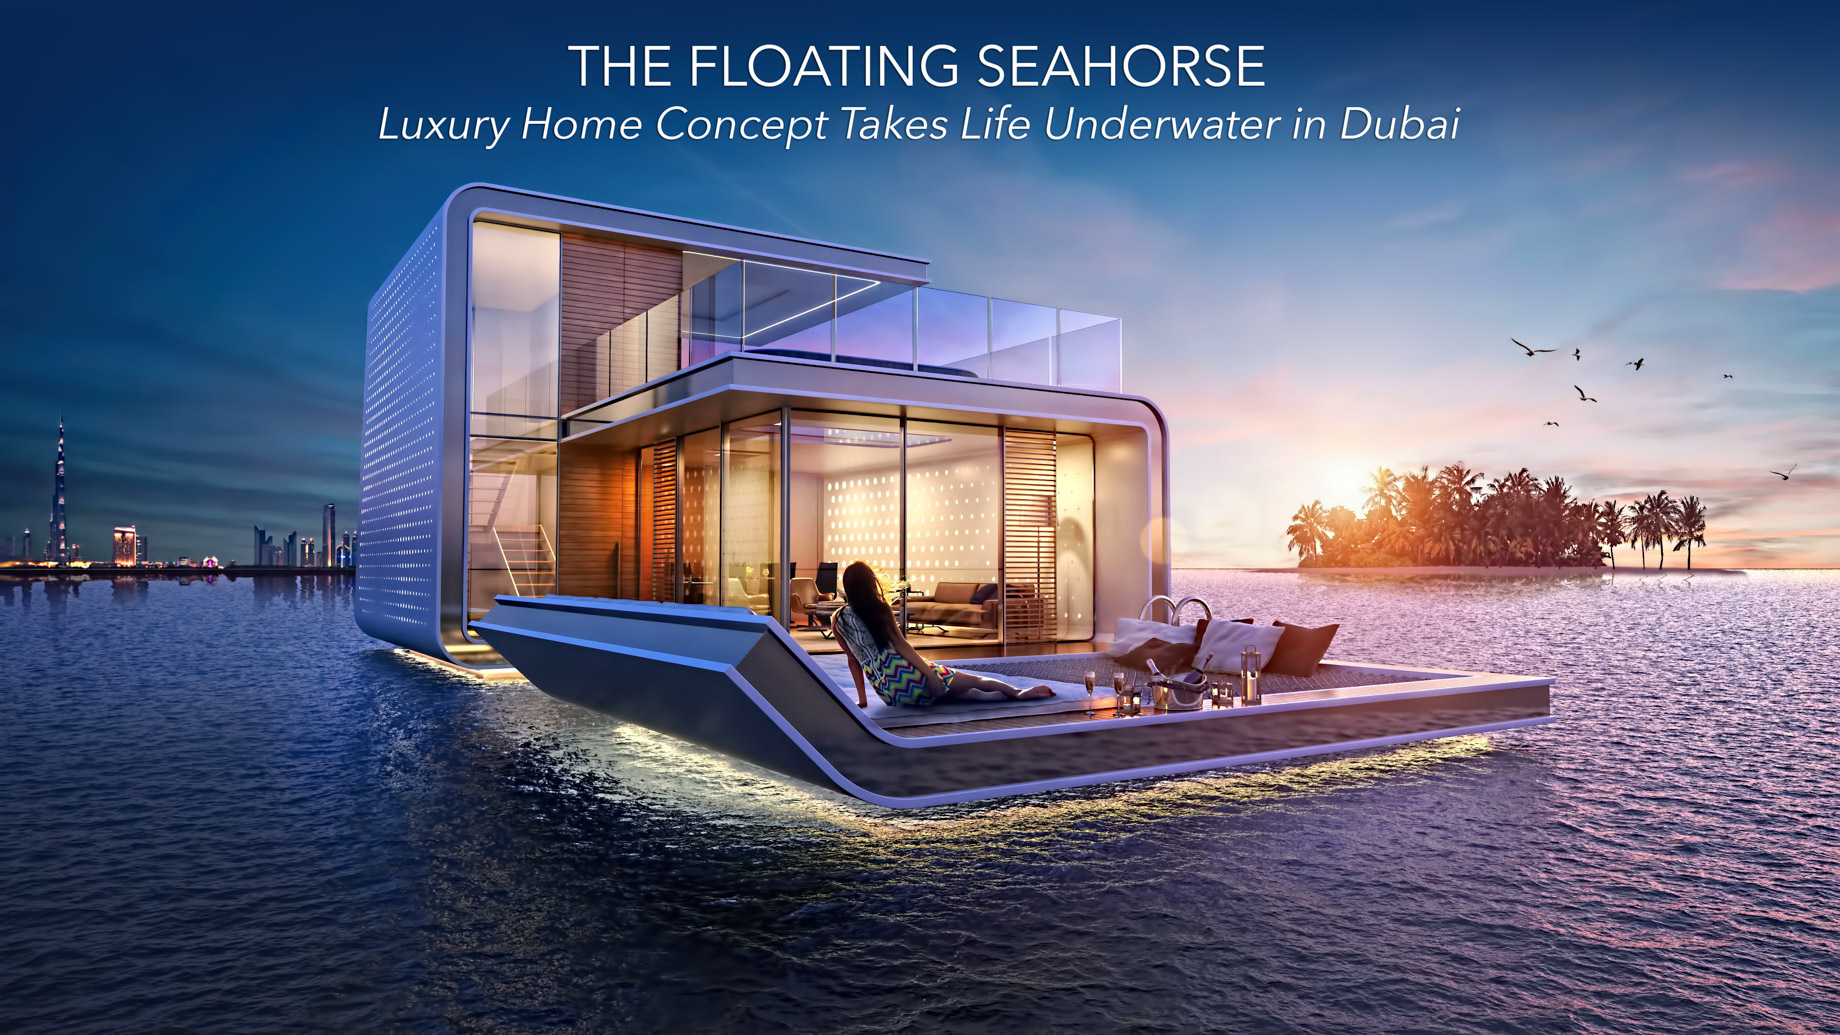 The Floating Seahorse - Luxury Home Concept Takes Life Underwater in Dubai